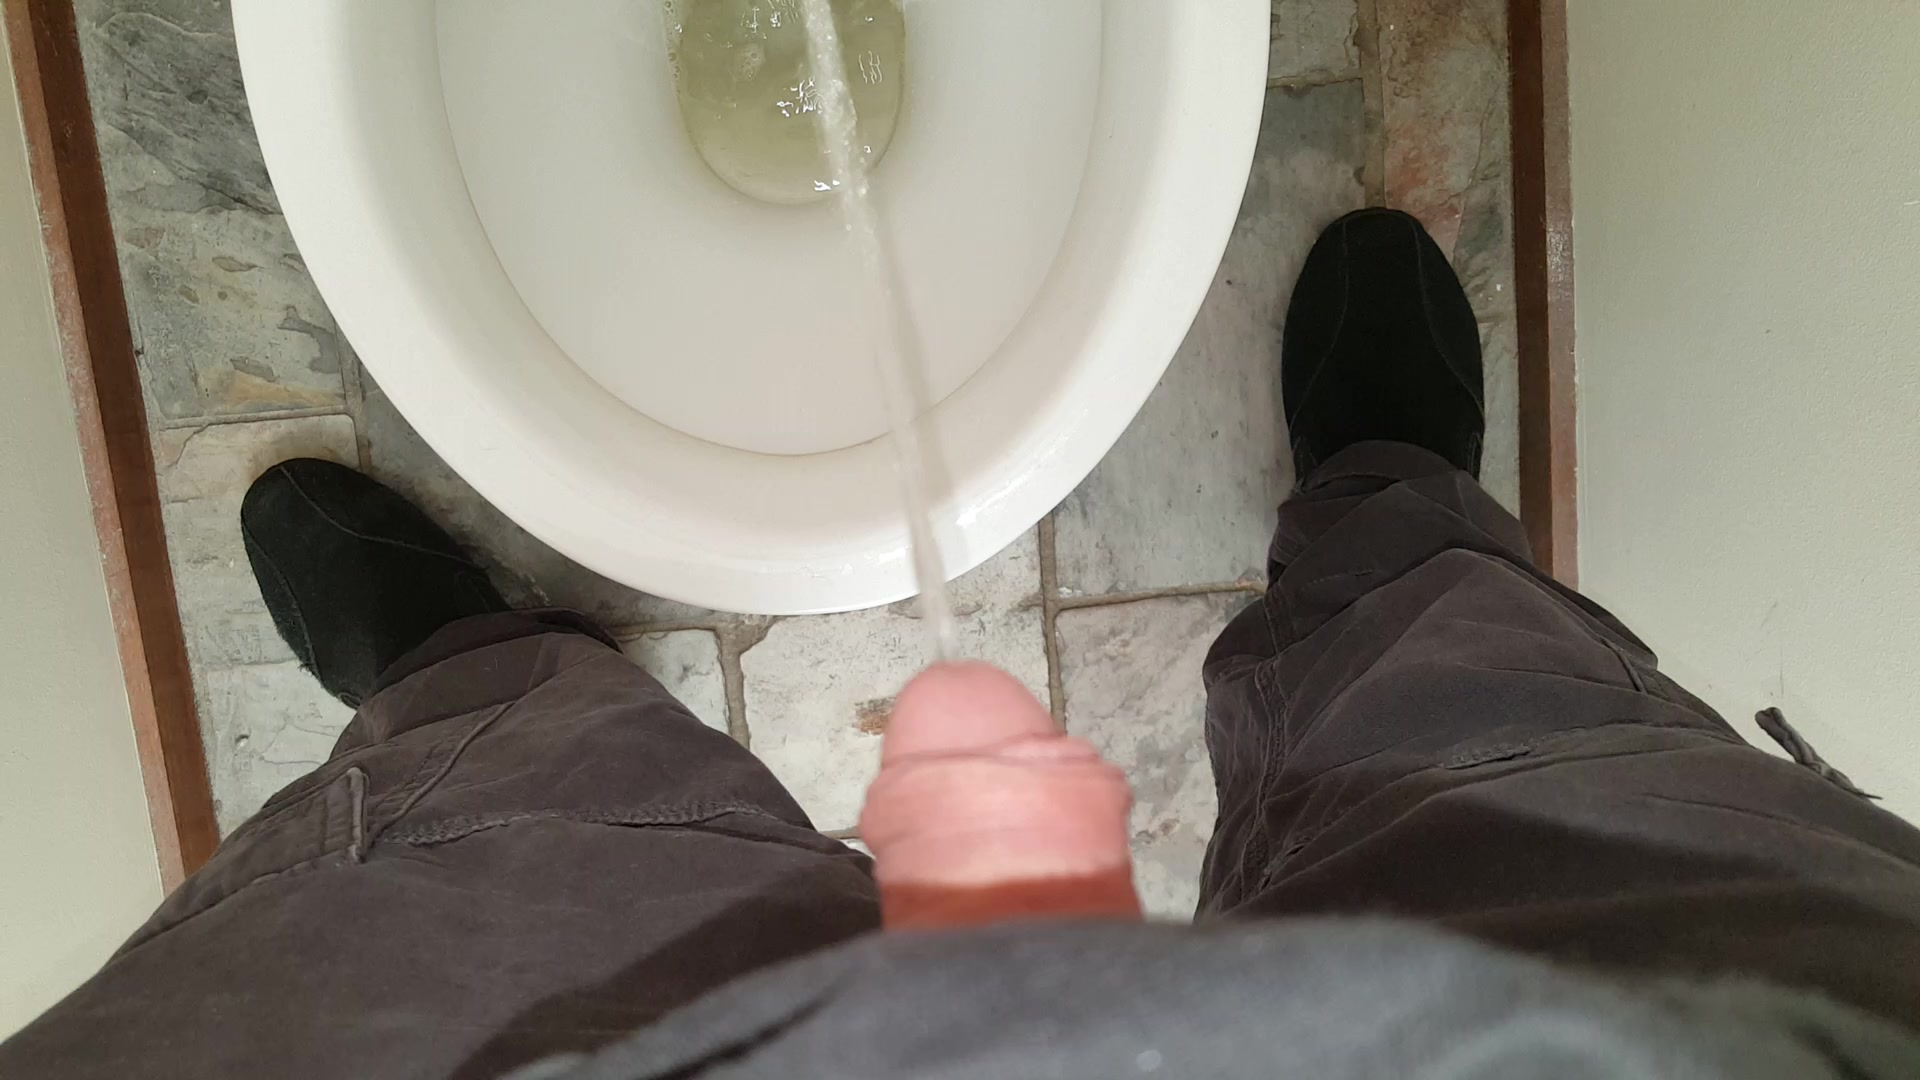 Just Me Pissing